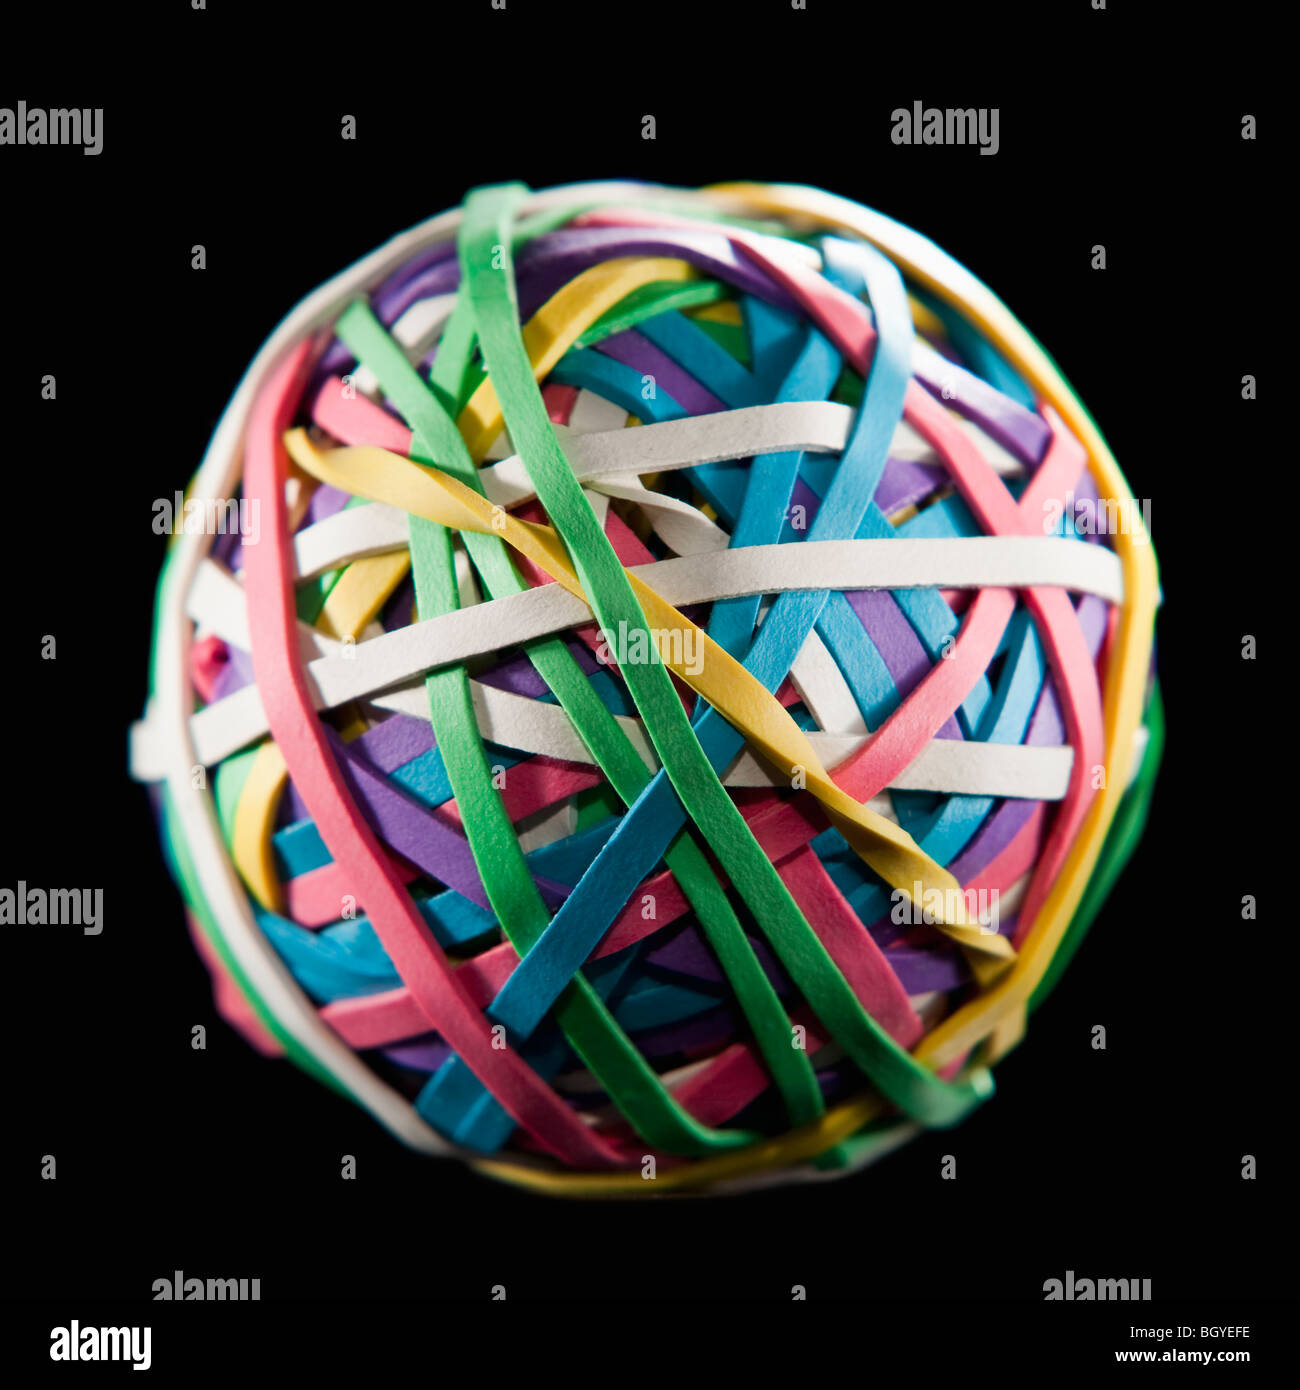 Ball of colorful rubberbands Stock Photo